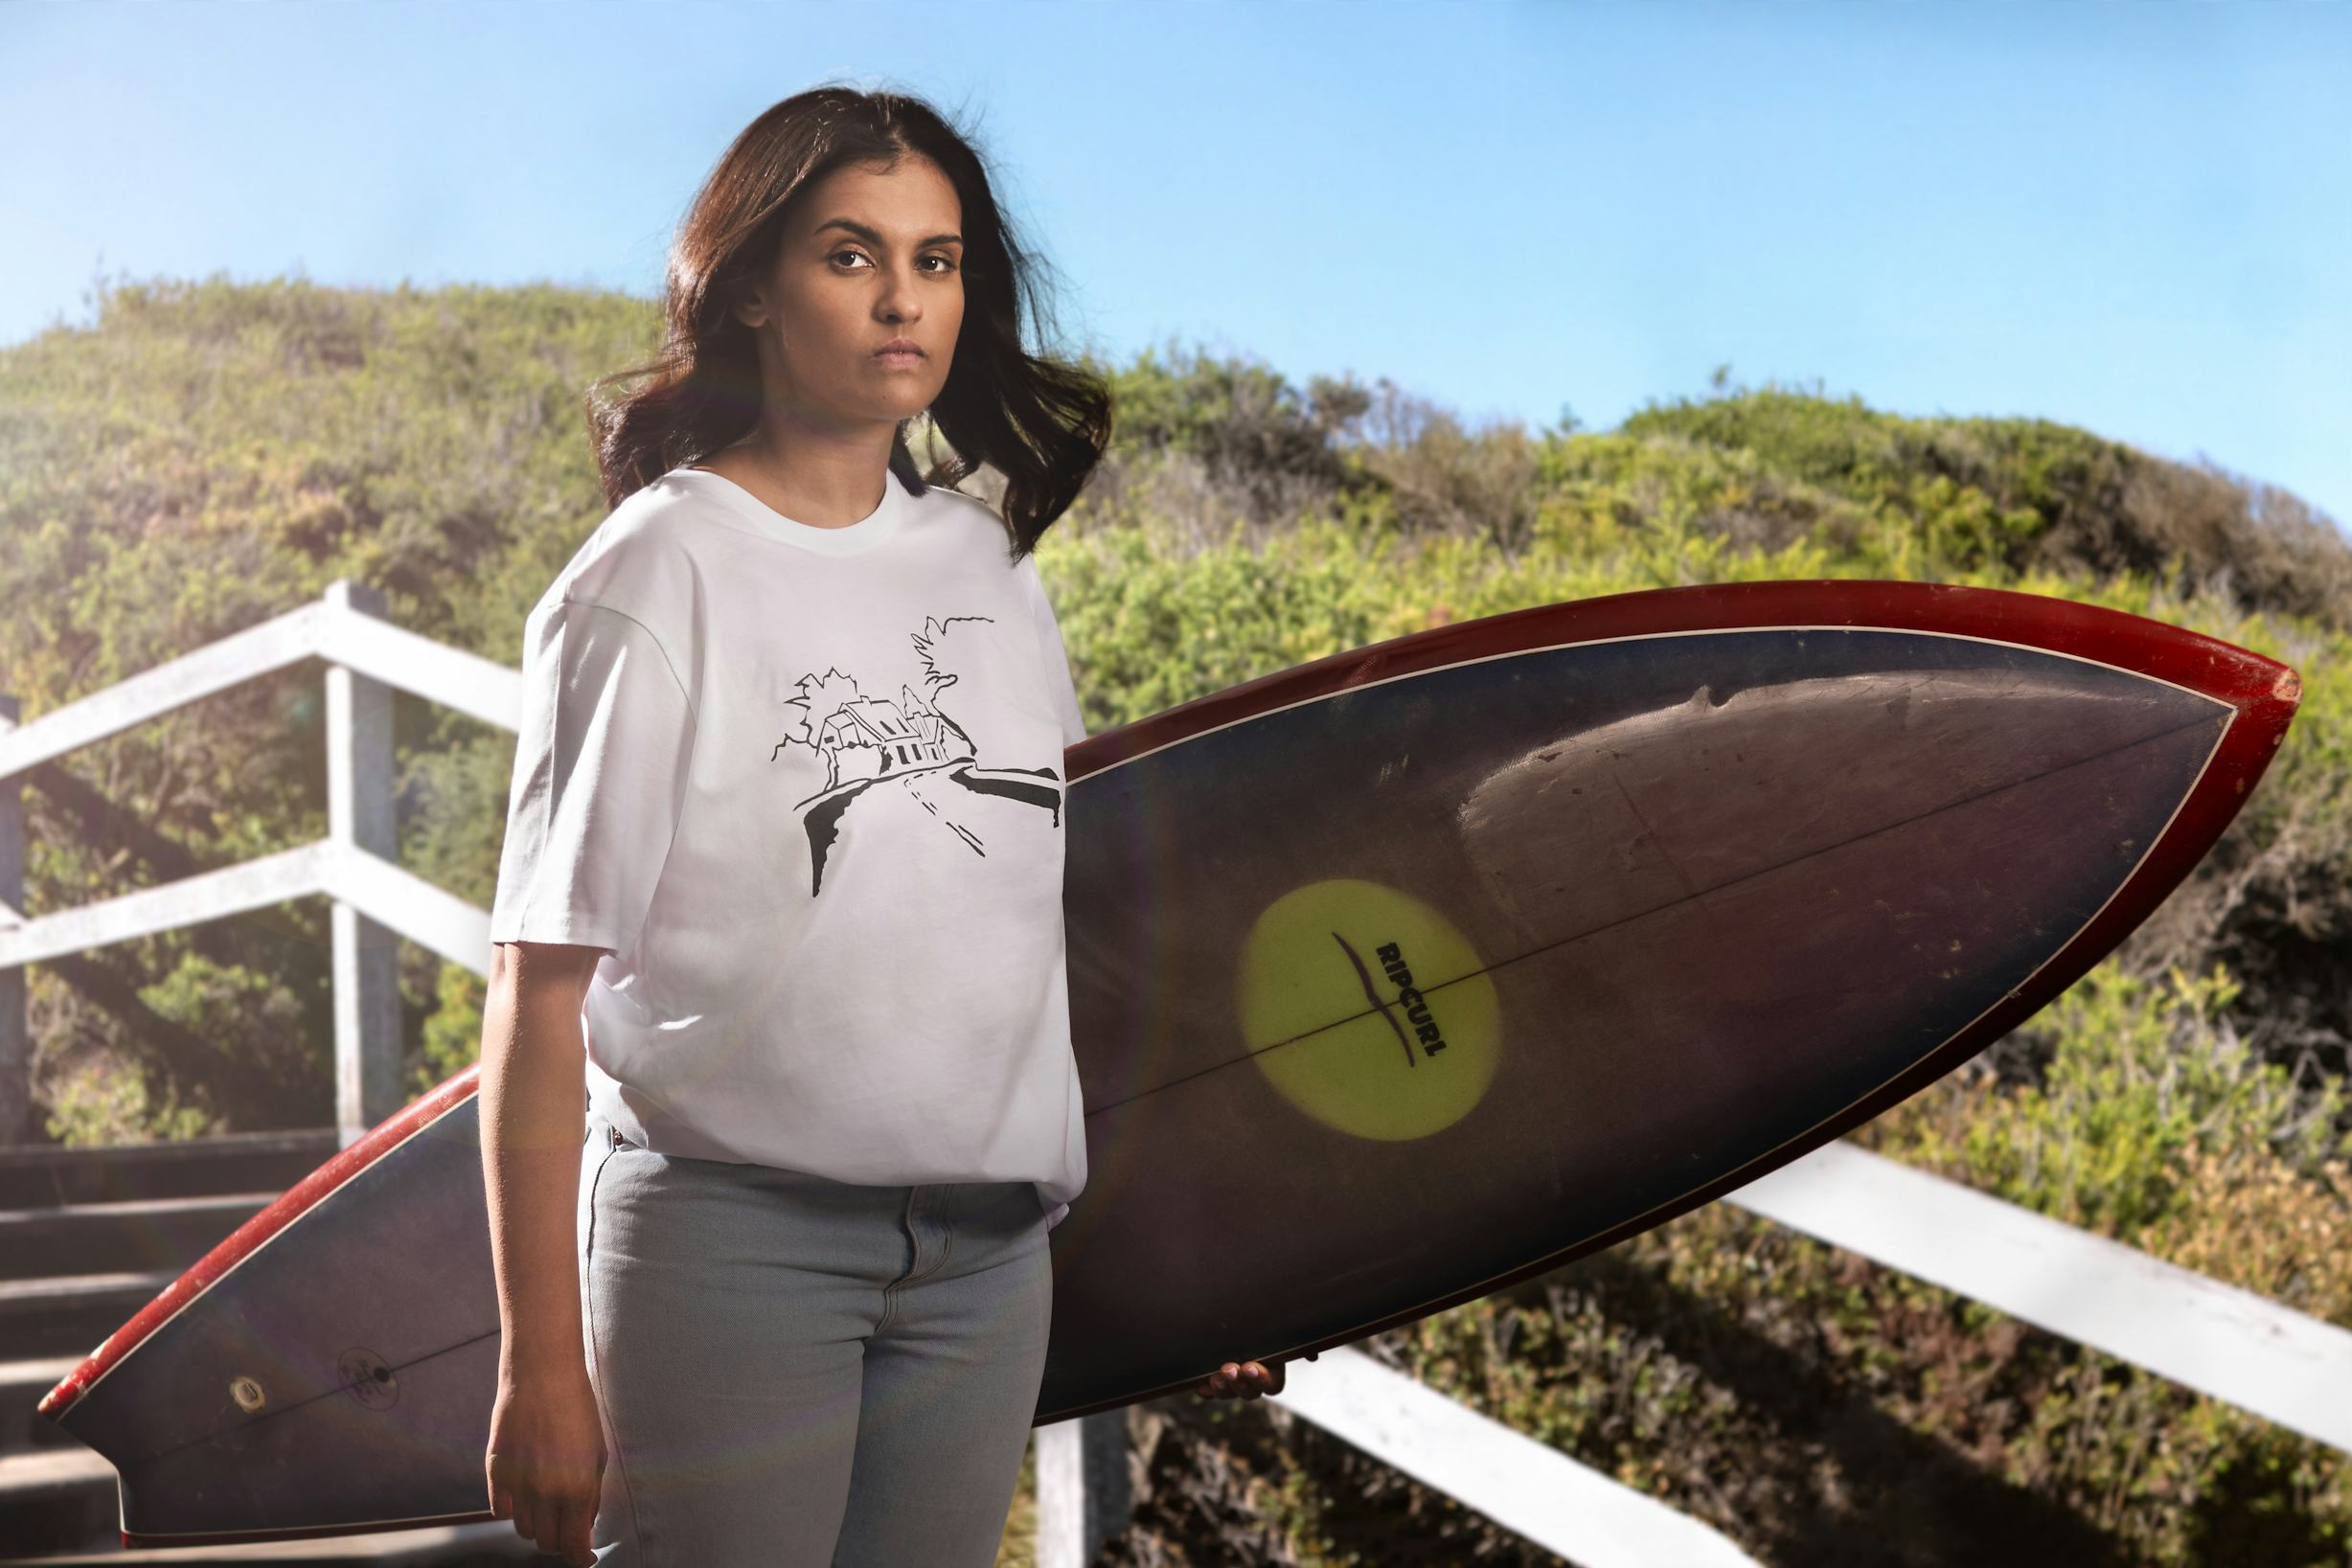 T Shirt design by Elly Chatfield (Gamillaroi), modelled by Shay McMahon (Eora), printed by Rip Curl. Image source: Deakin University